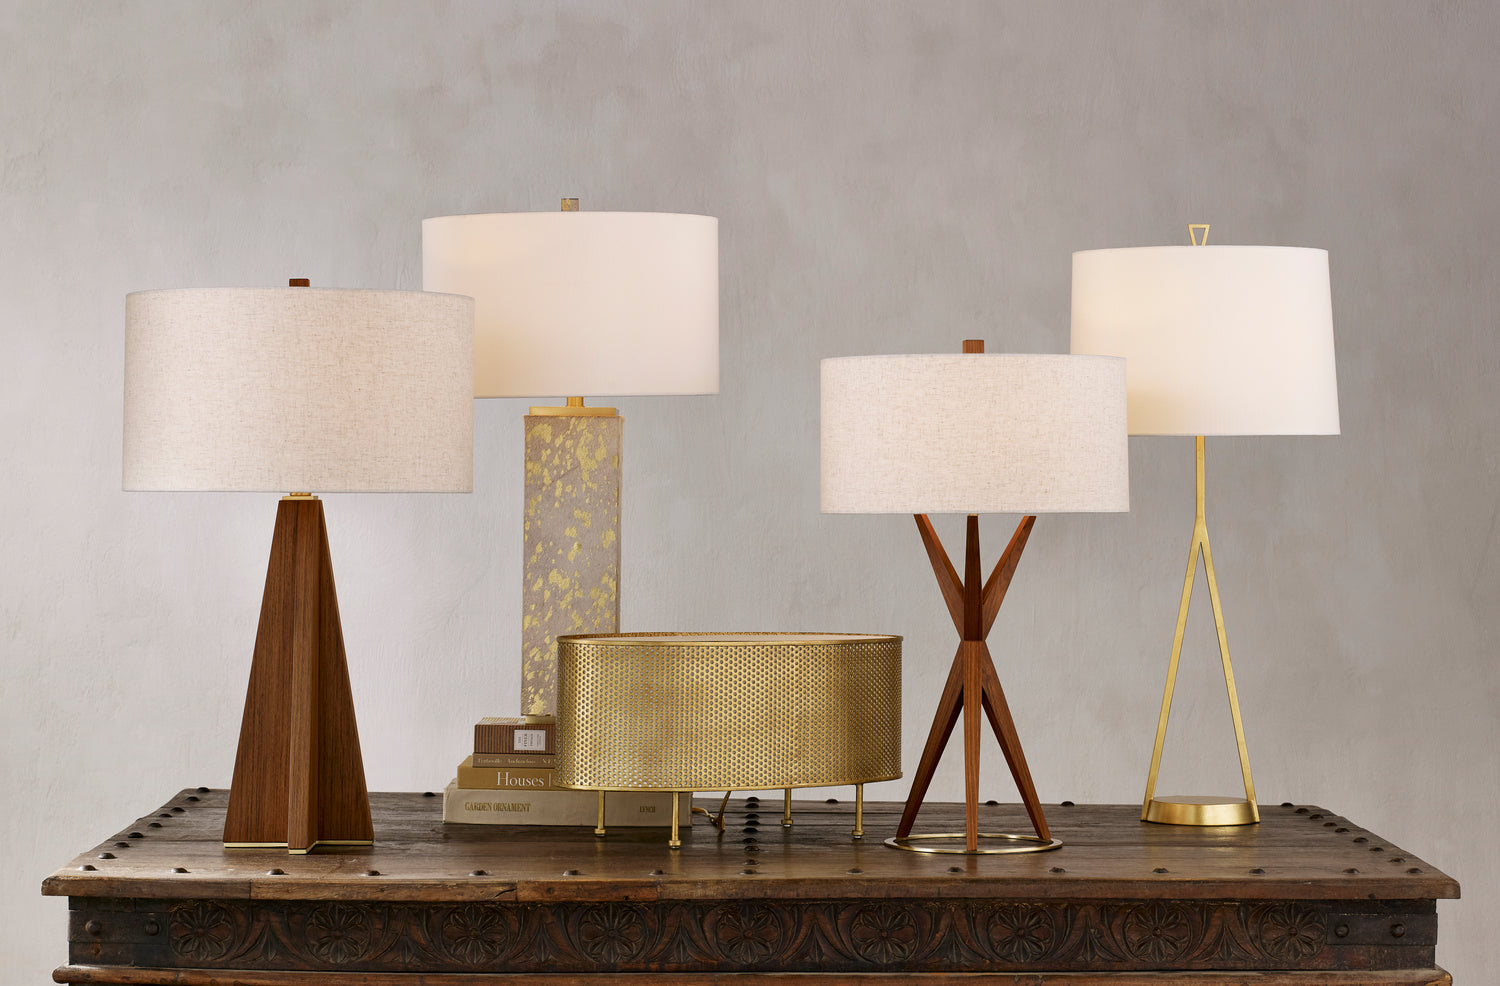 One Light Table Lamp from the Variation collection in Teak/Brushed Brass finish